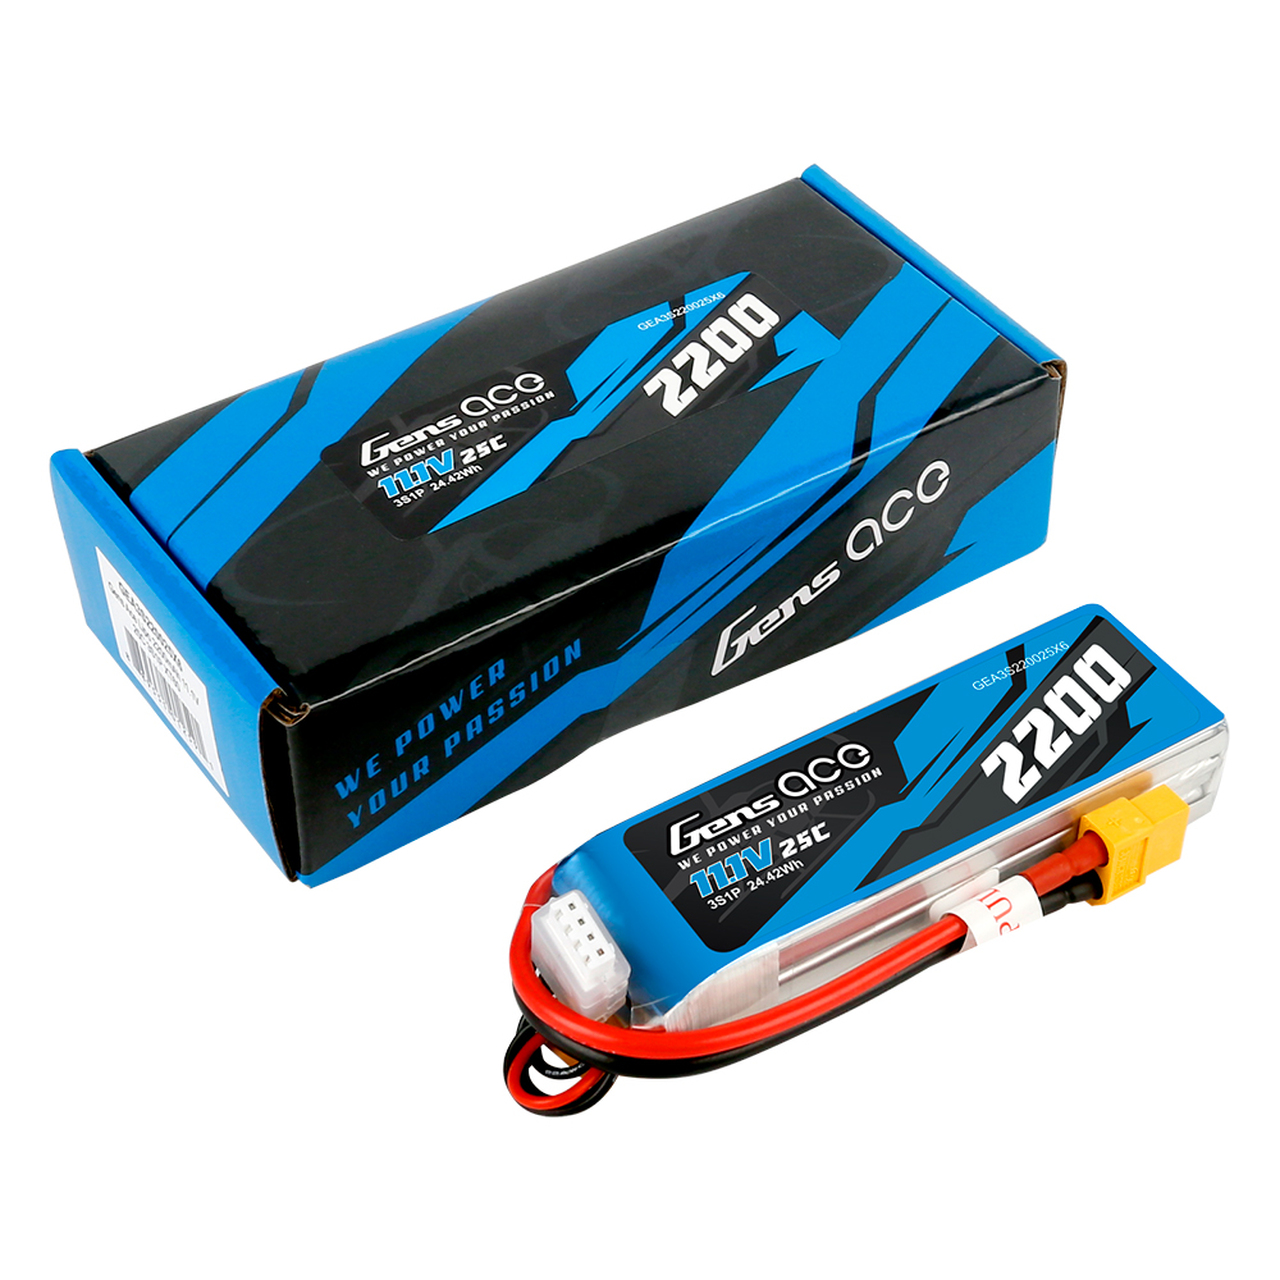 Gens ace 2200mAh 11.1V 3S 25C Lipo Battery Pack with Deans Plug